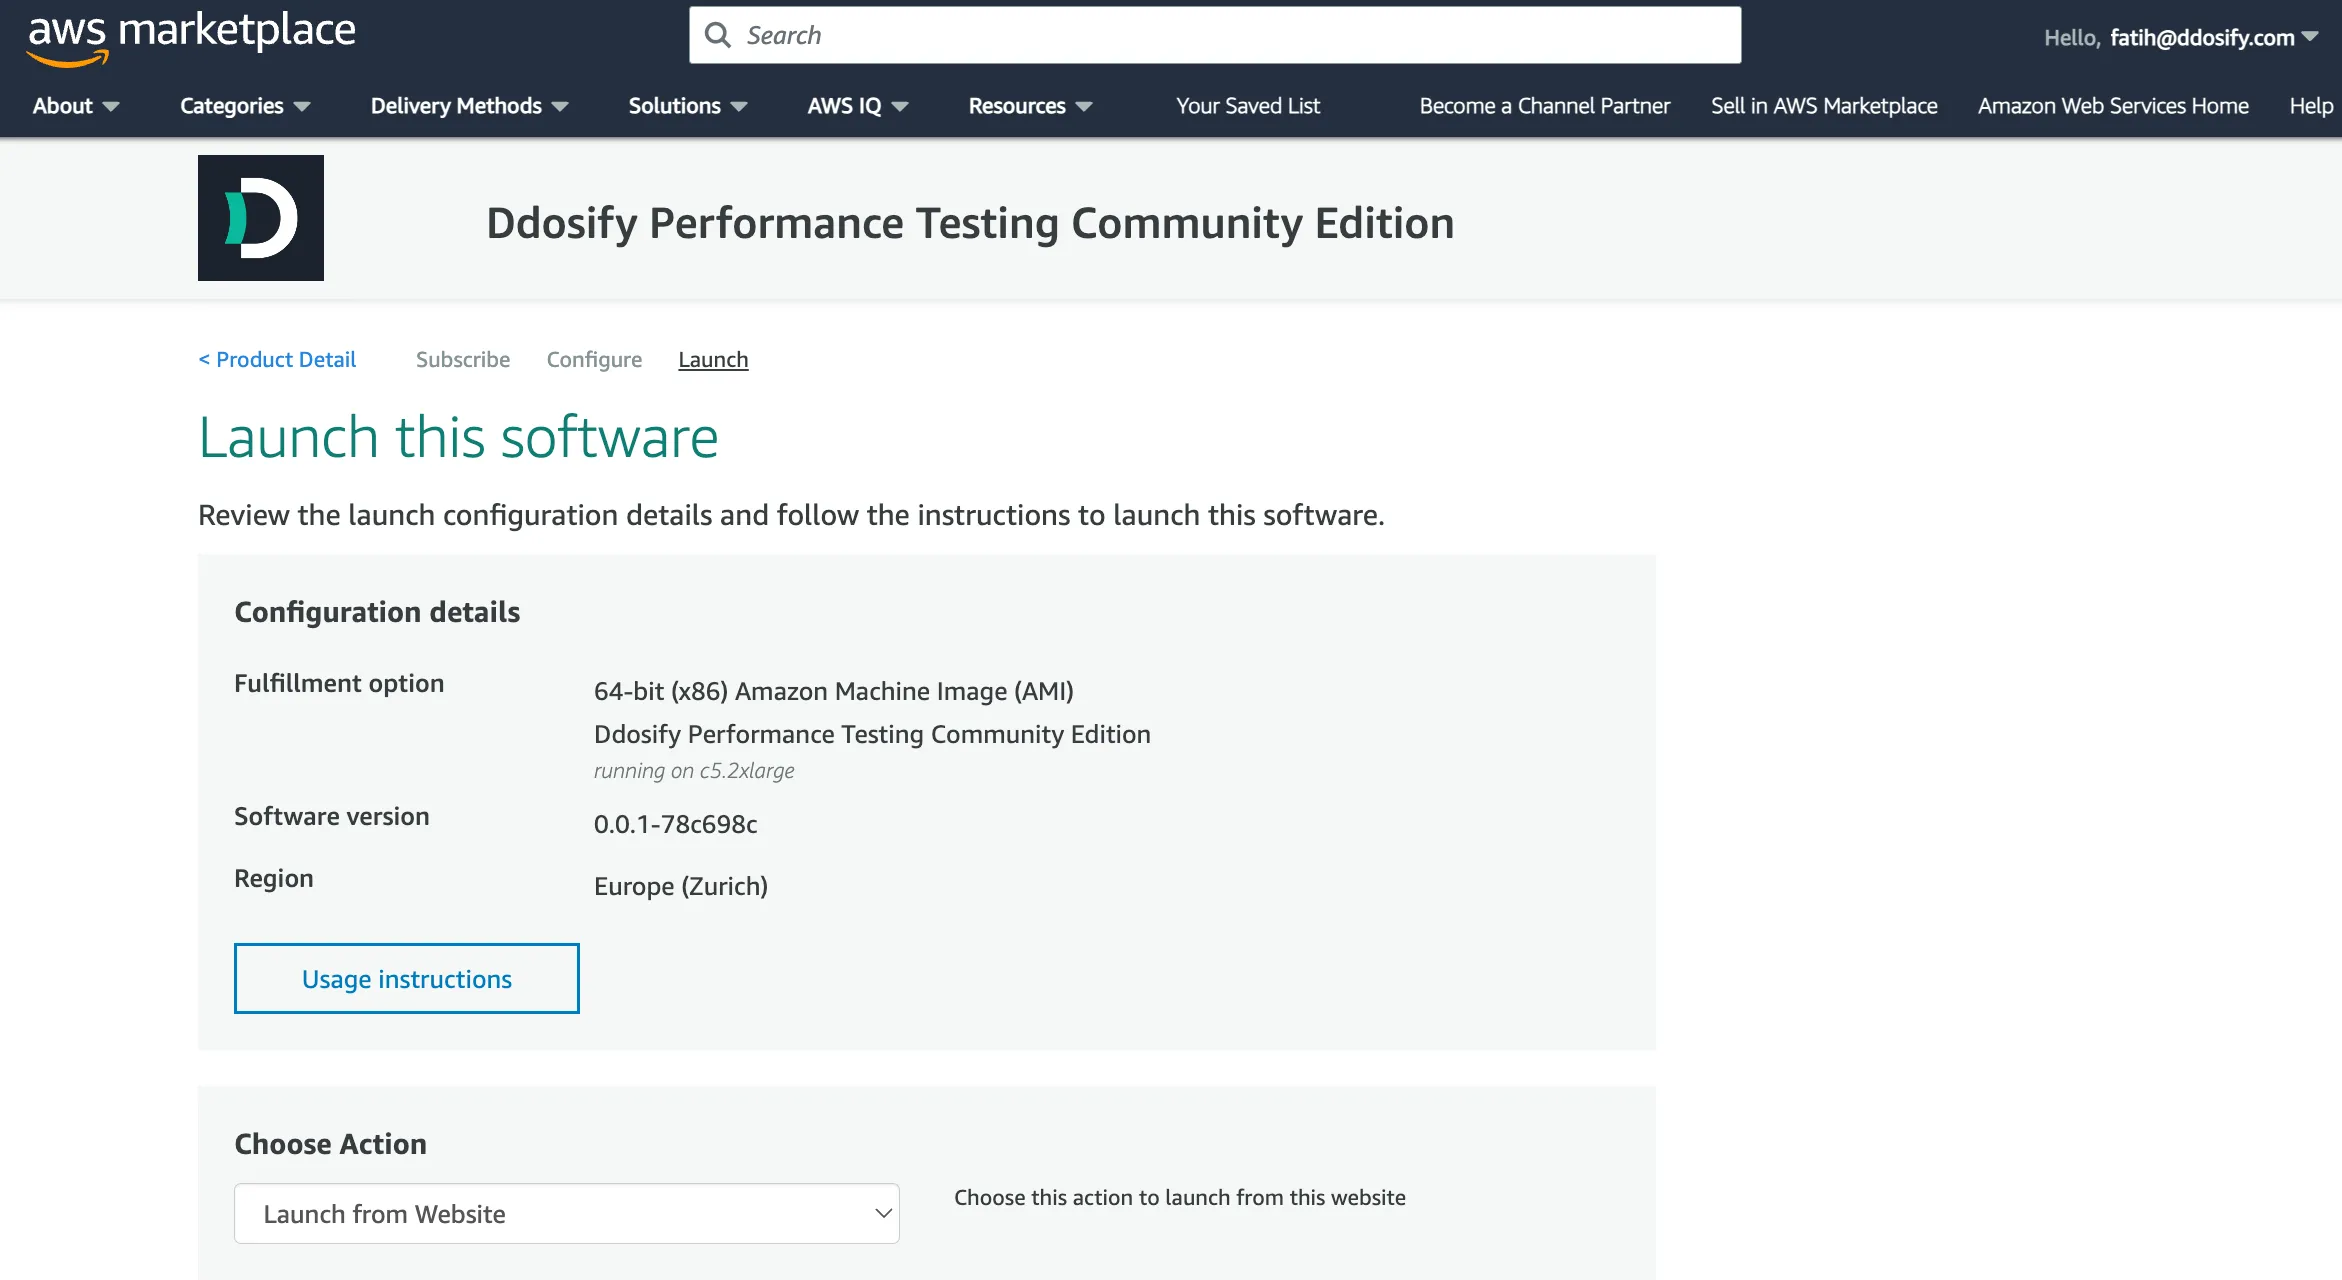 AWS Ddosify Product Page